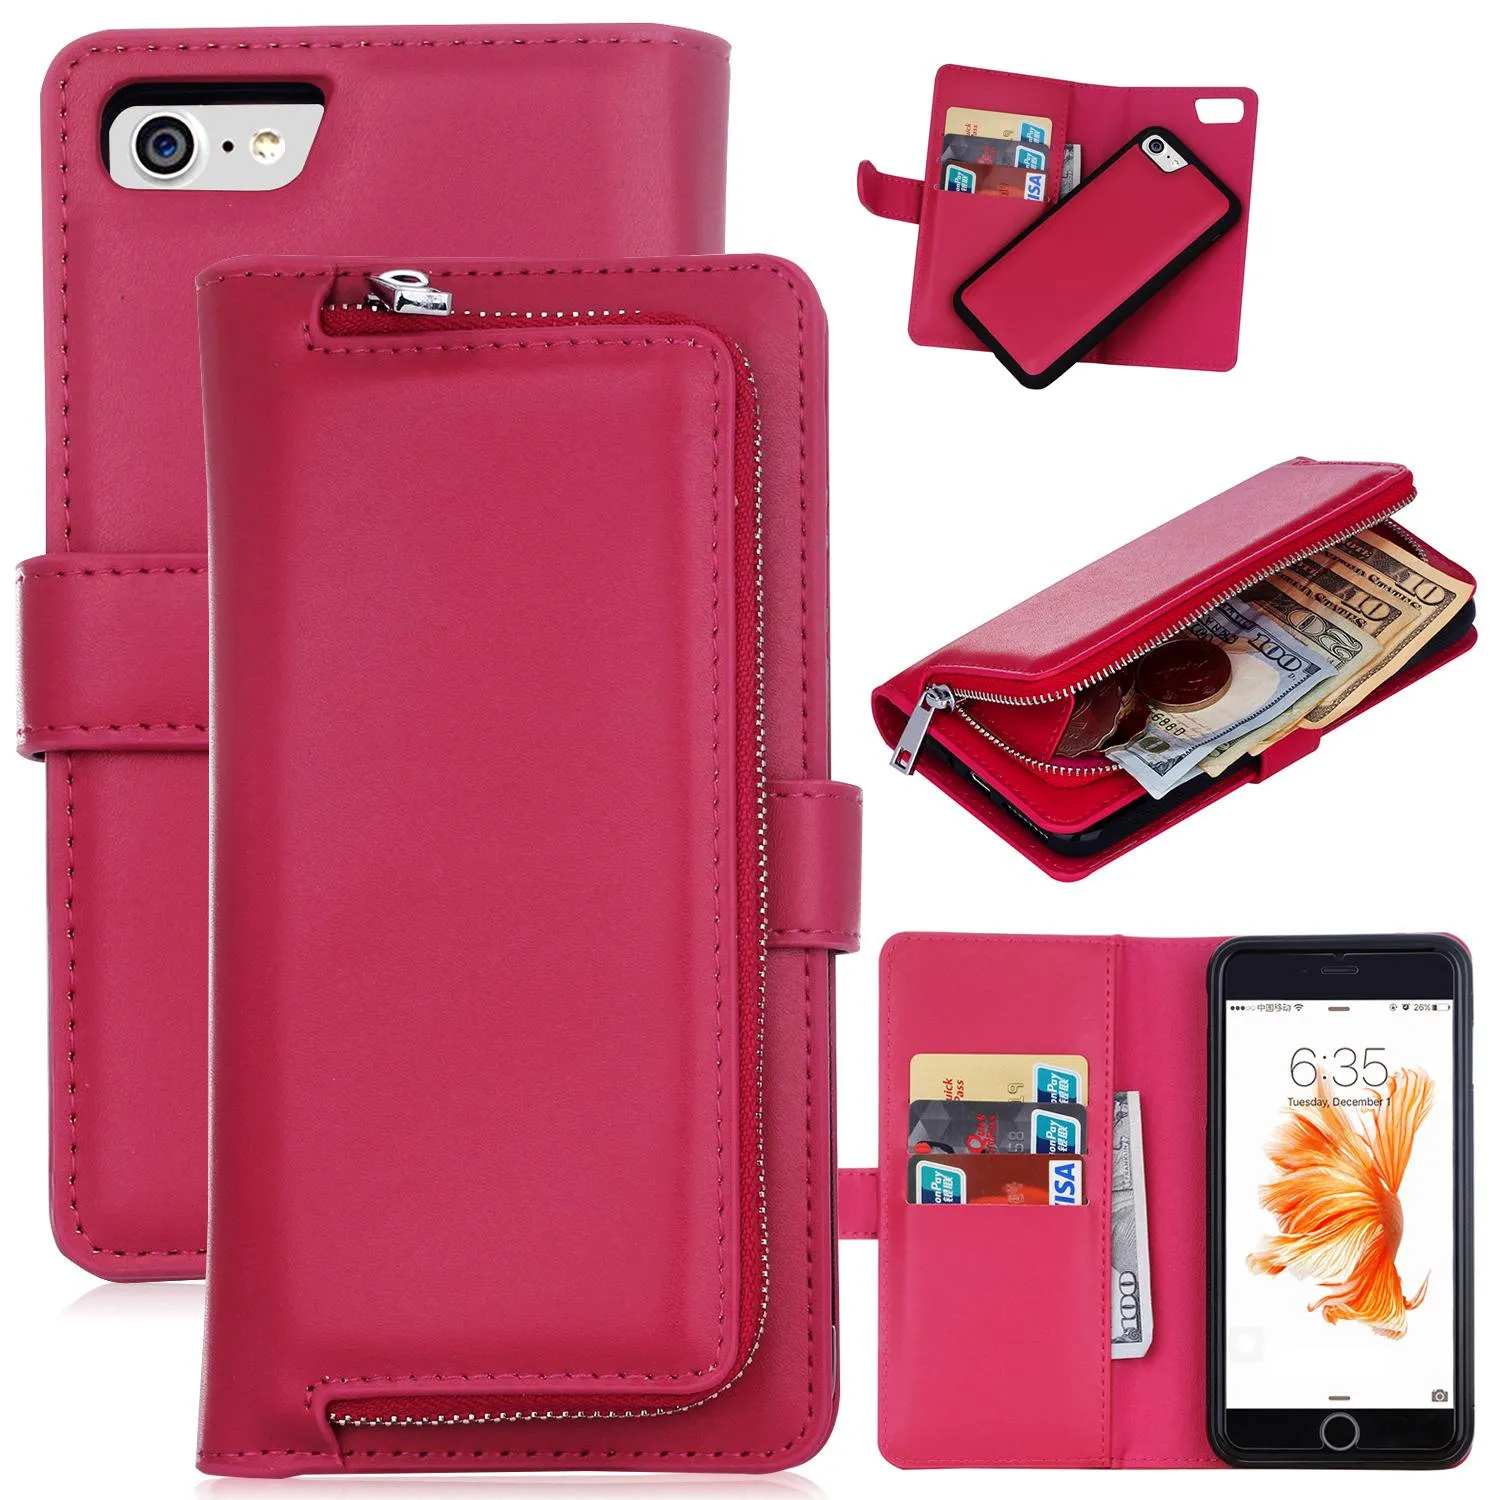 2 in 1 Magnet Detachable Removable Zipper Leather Wallet Cases Cover for iphone 7 8 1PCS/LOT